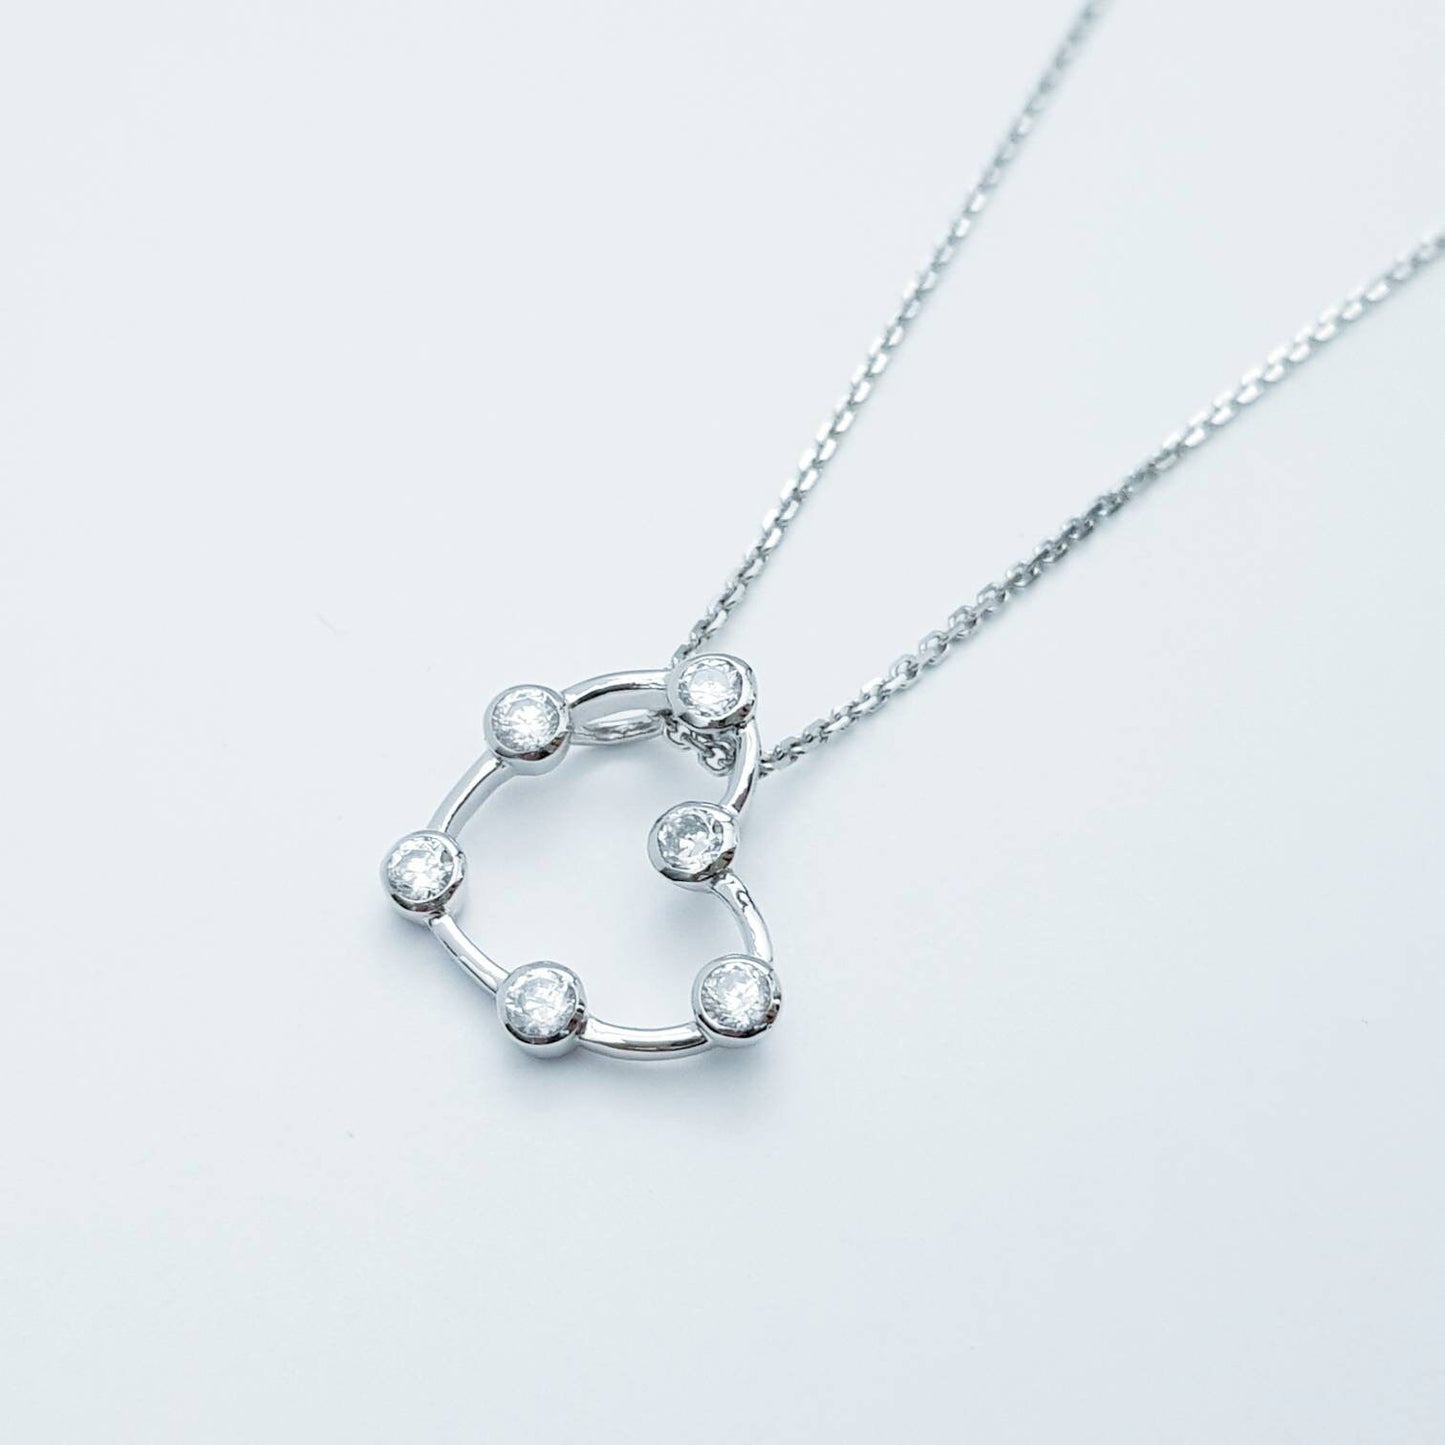 Floating heart necklace set with sparkling faux diamonds, gift for girlfriend